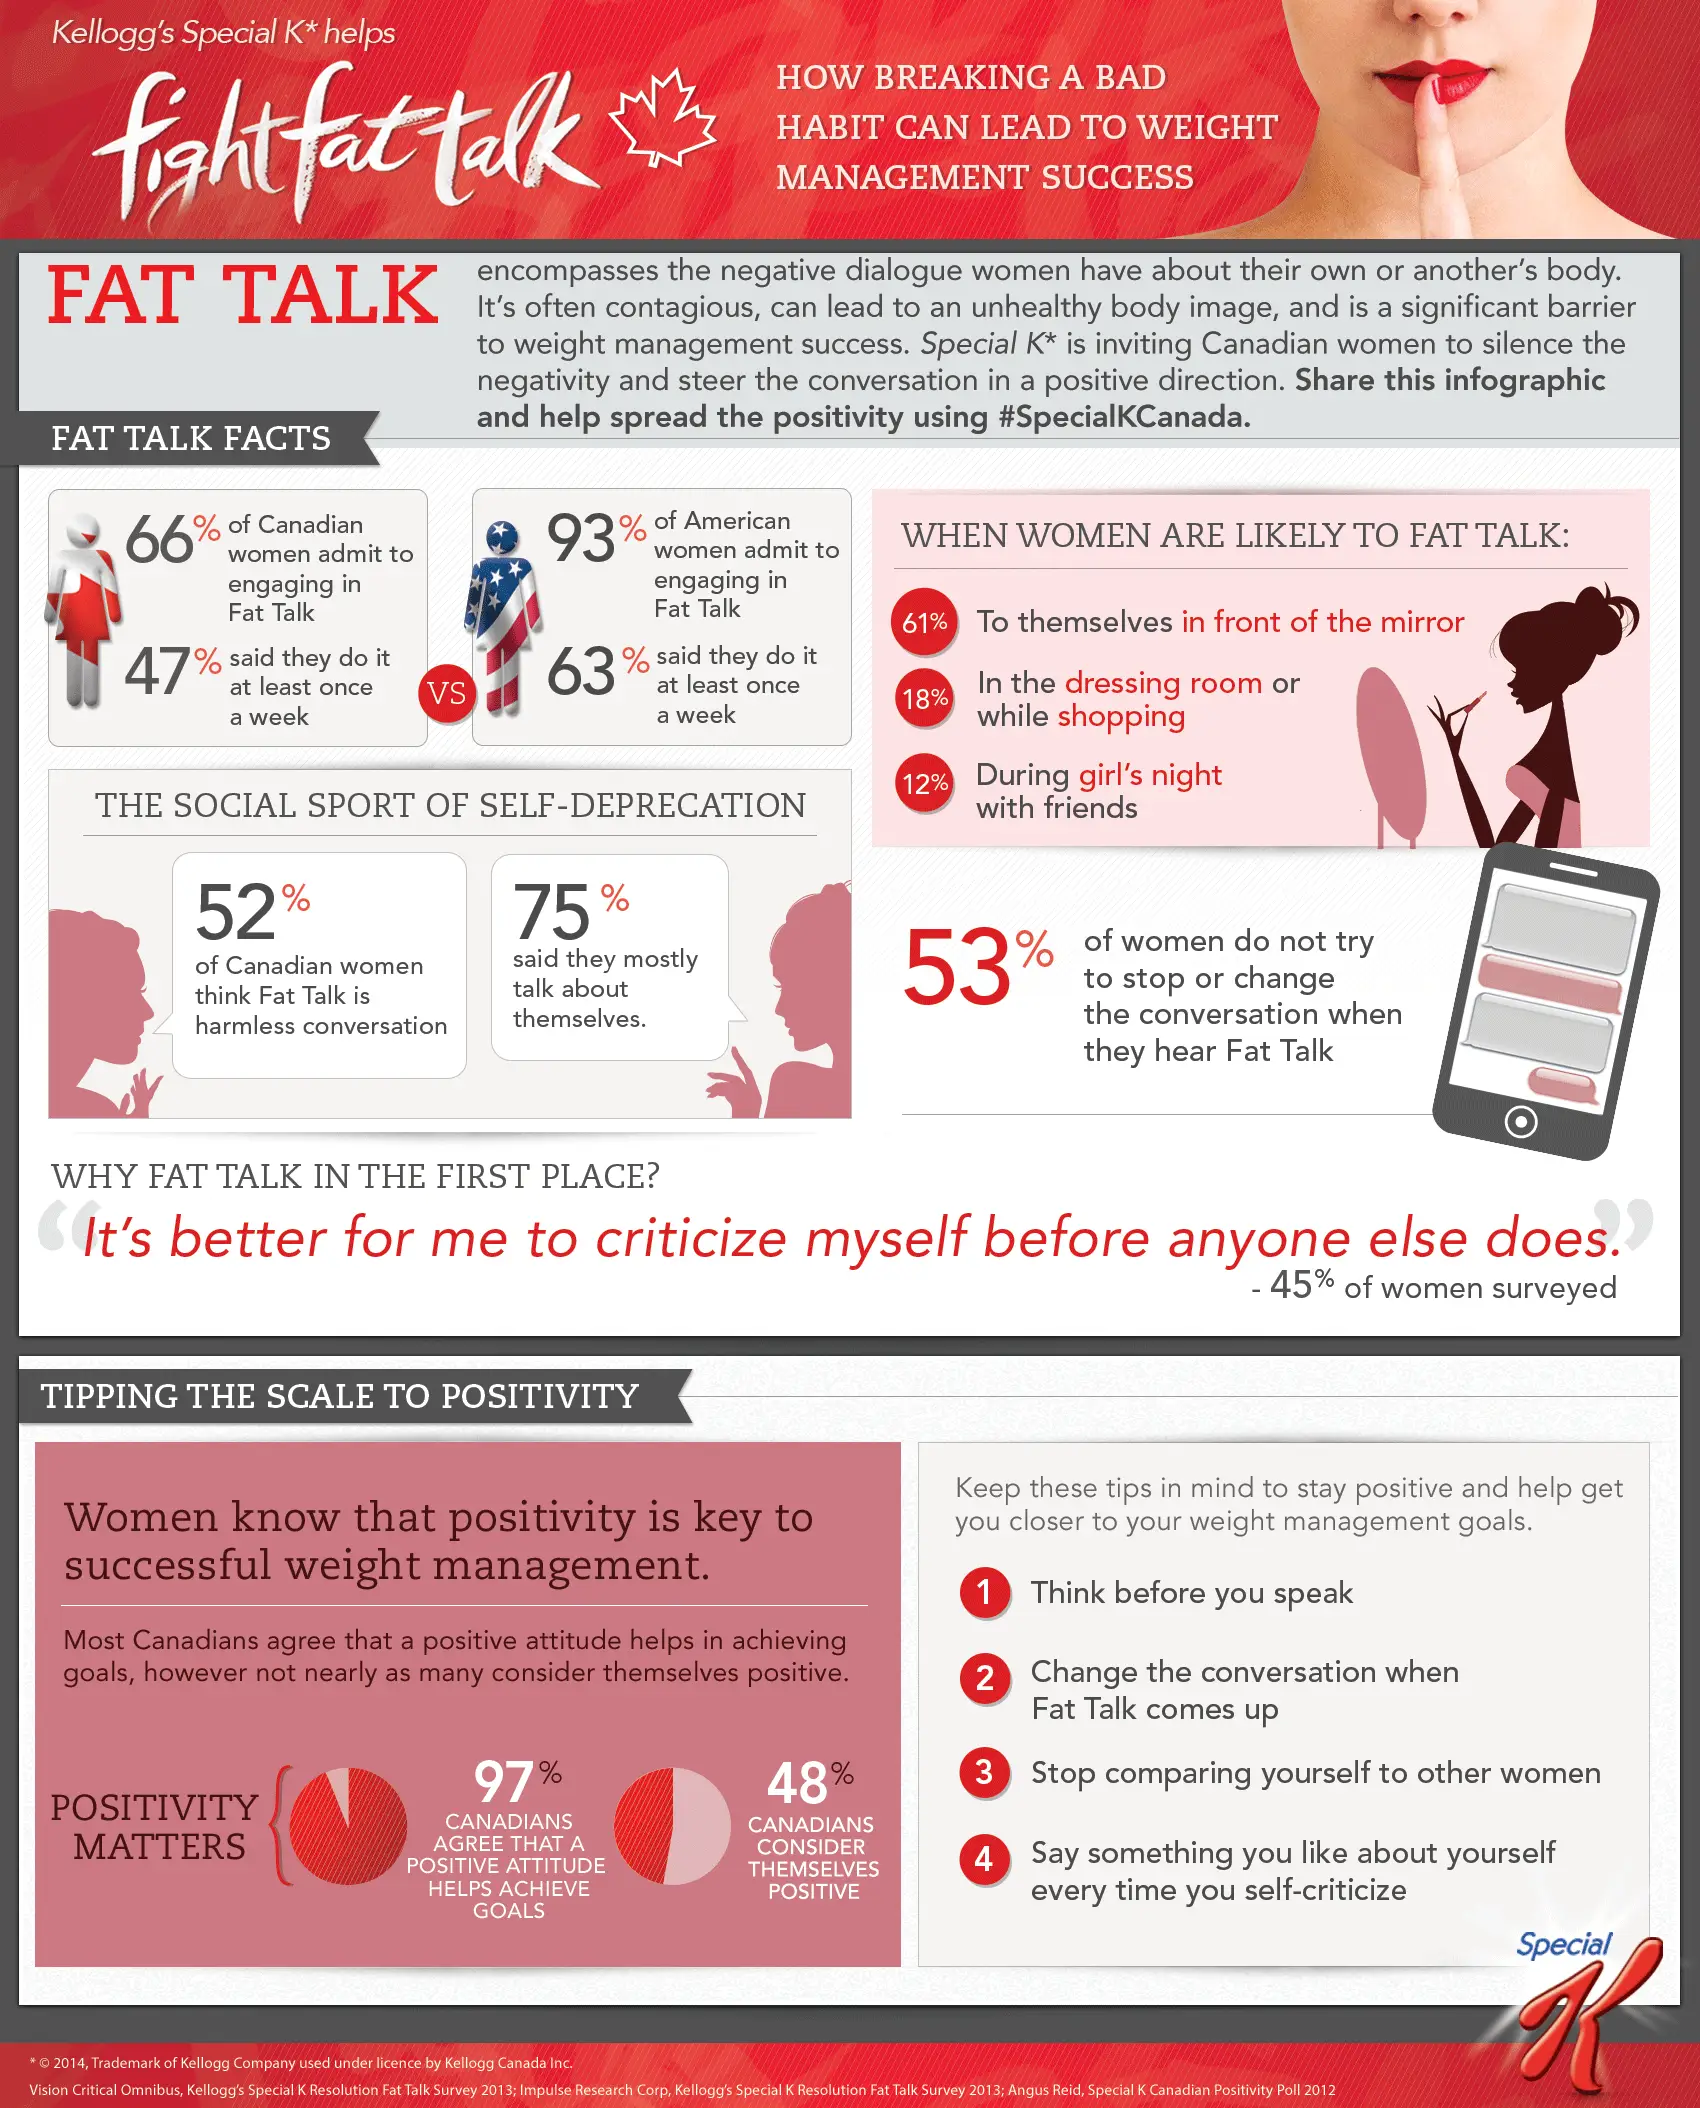 Fight Fat Talk With Positive Talk [InfoGraphic]
